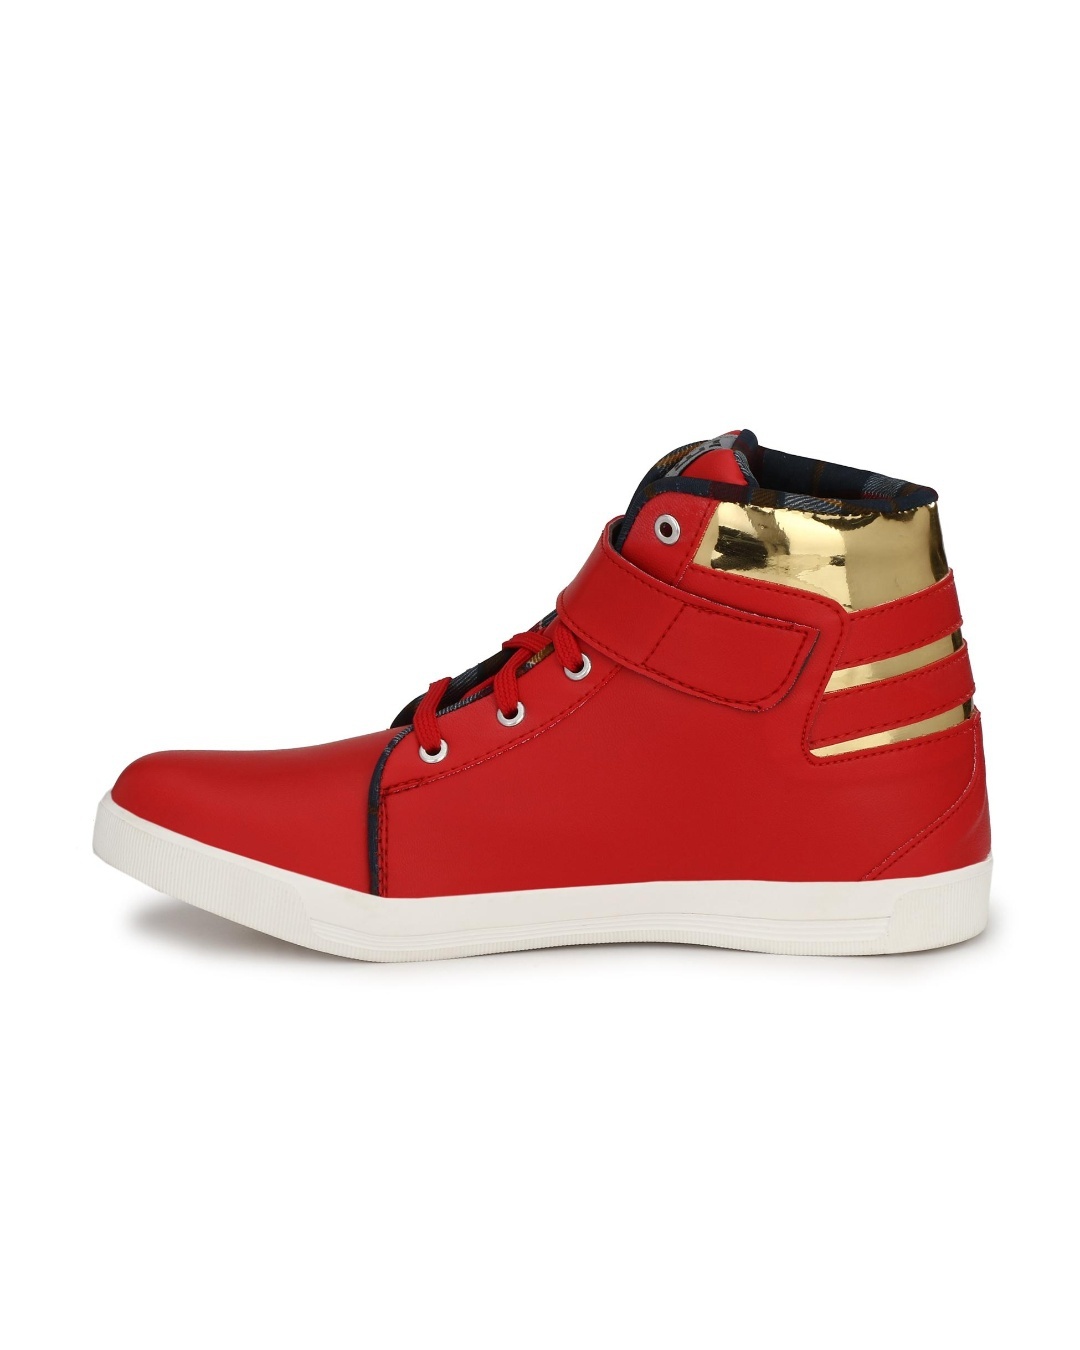 Buy Men's Red & Gold Color Block Casual Shoes Online in India at Bewakoof